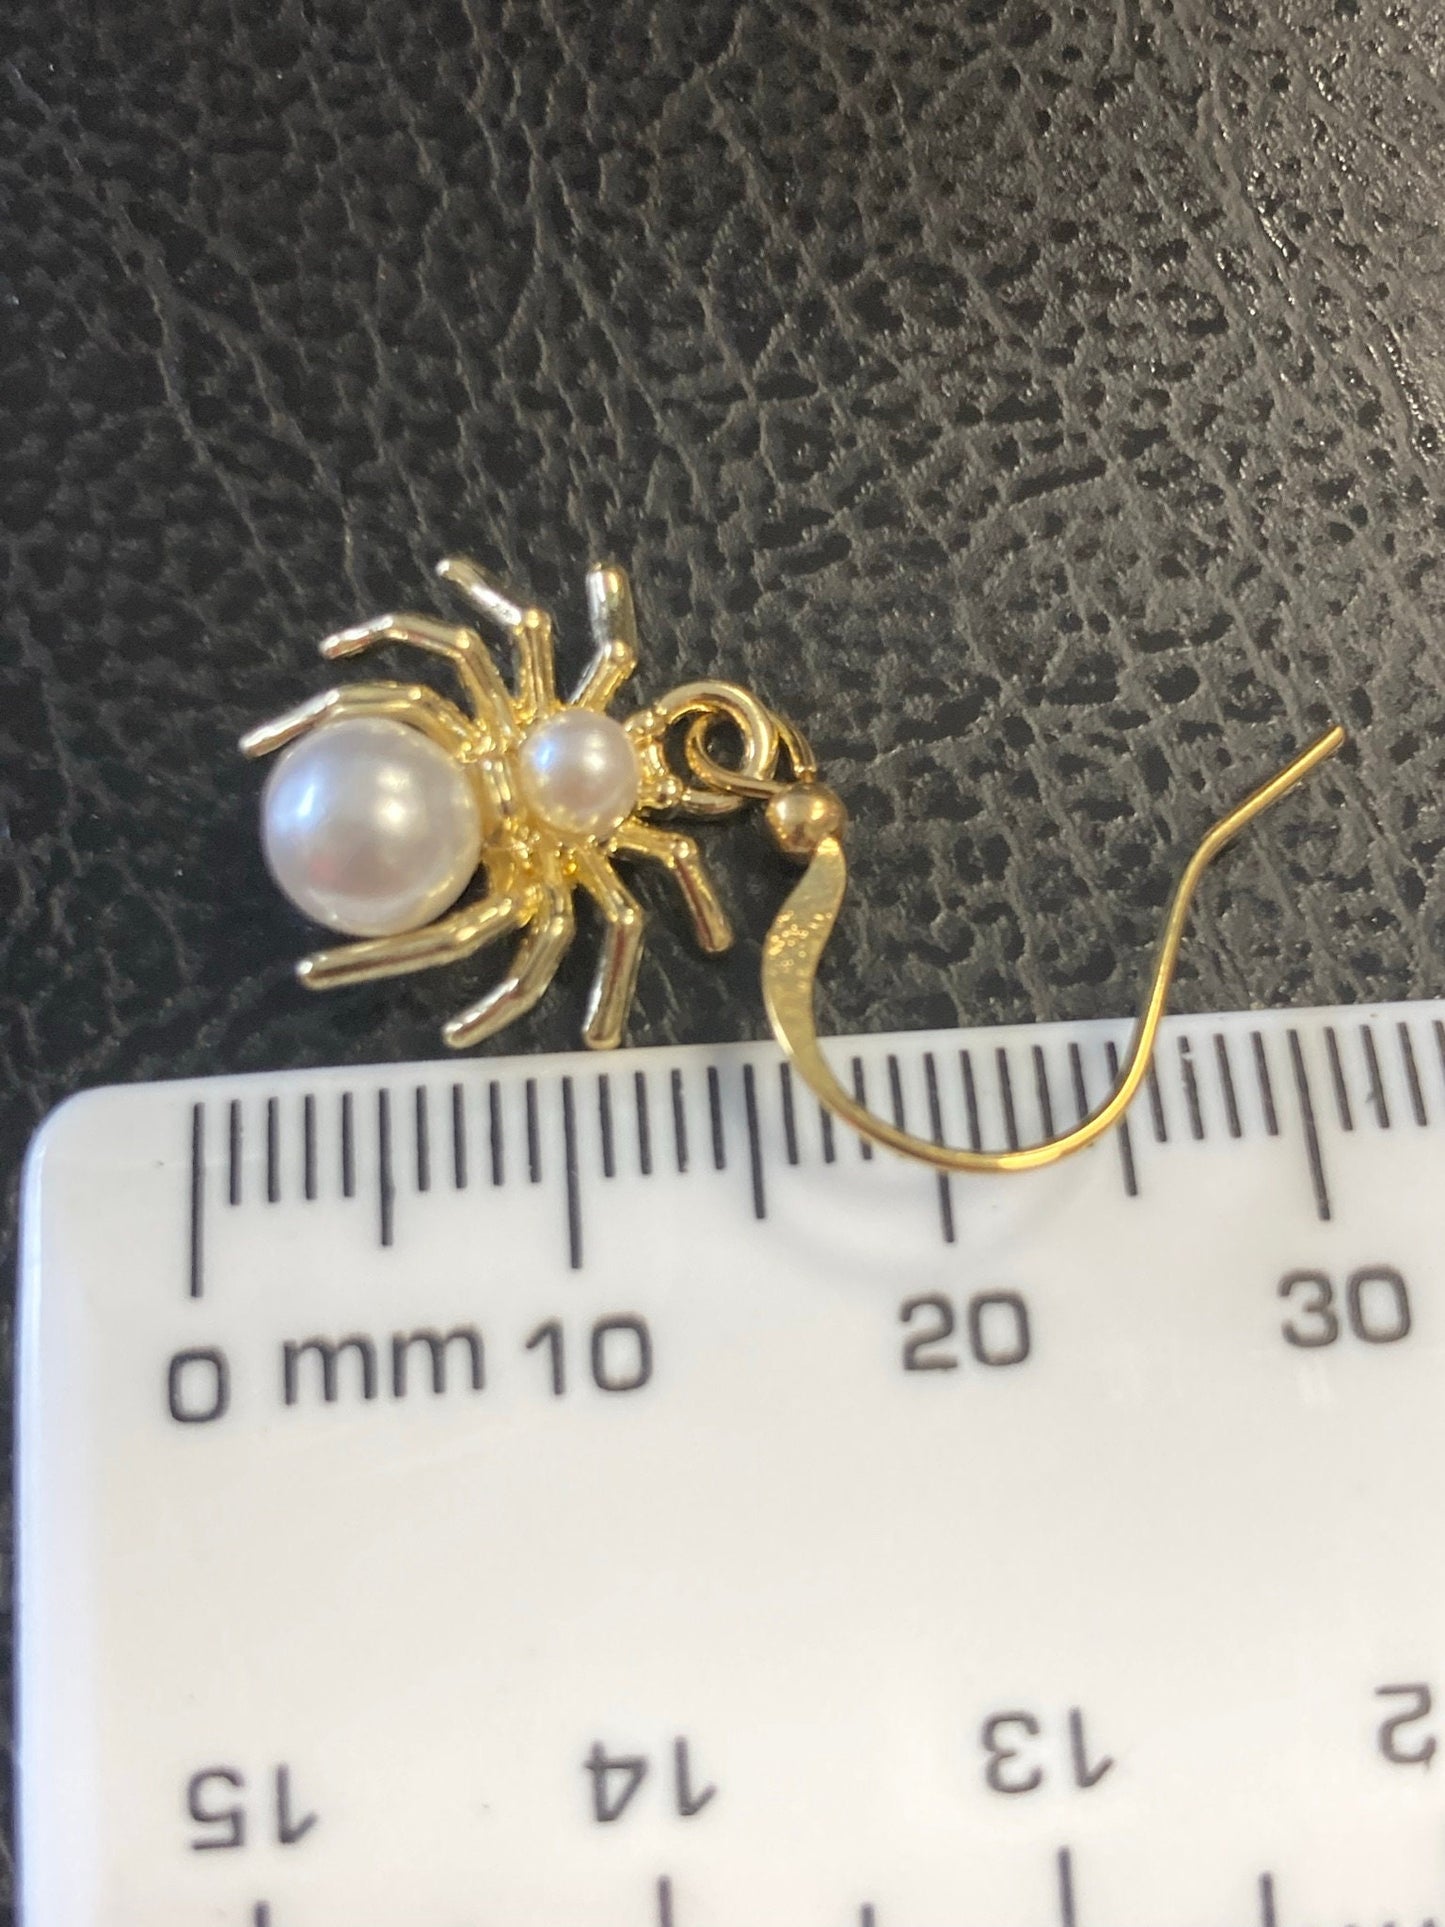 Handmade gold tone small Spooky Spider drop earrings